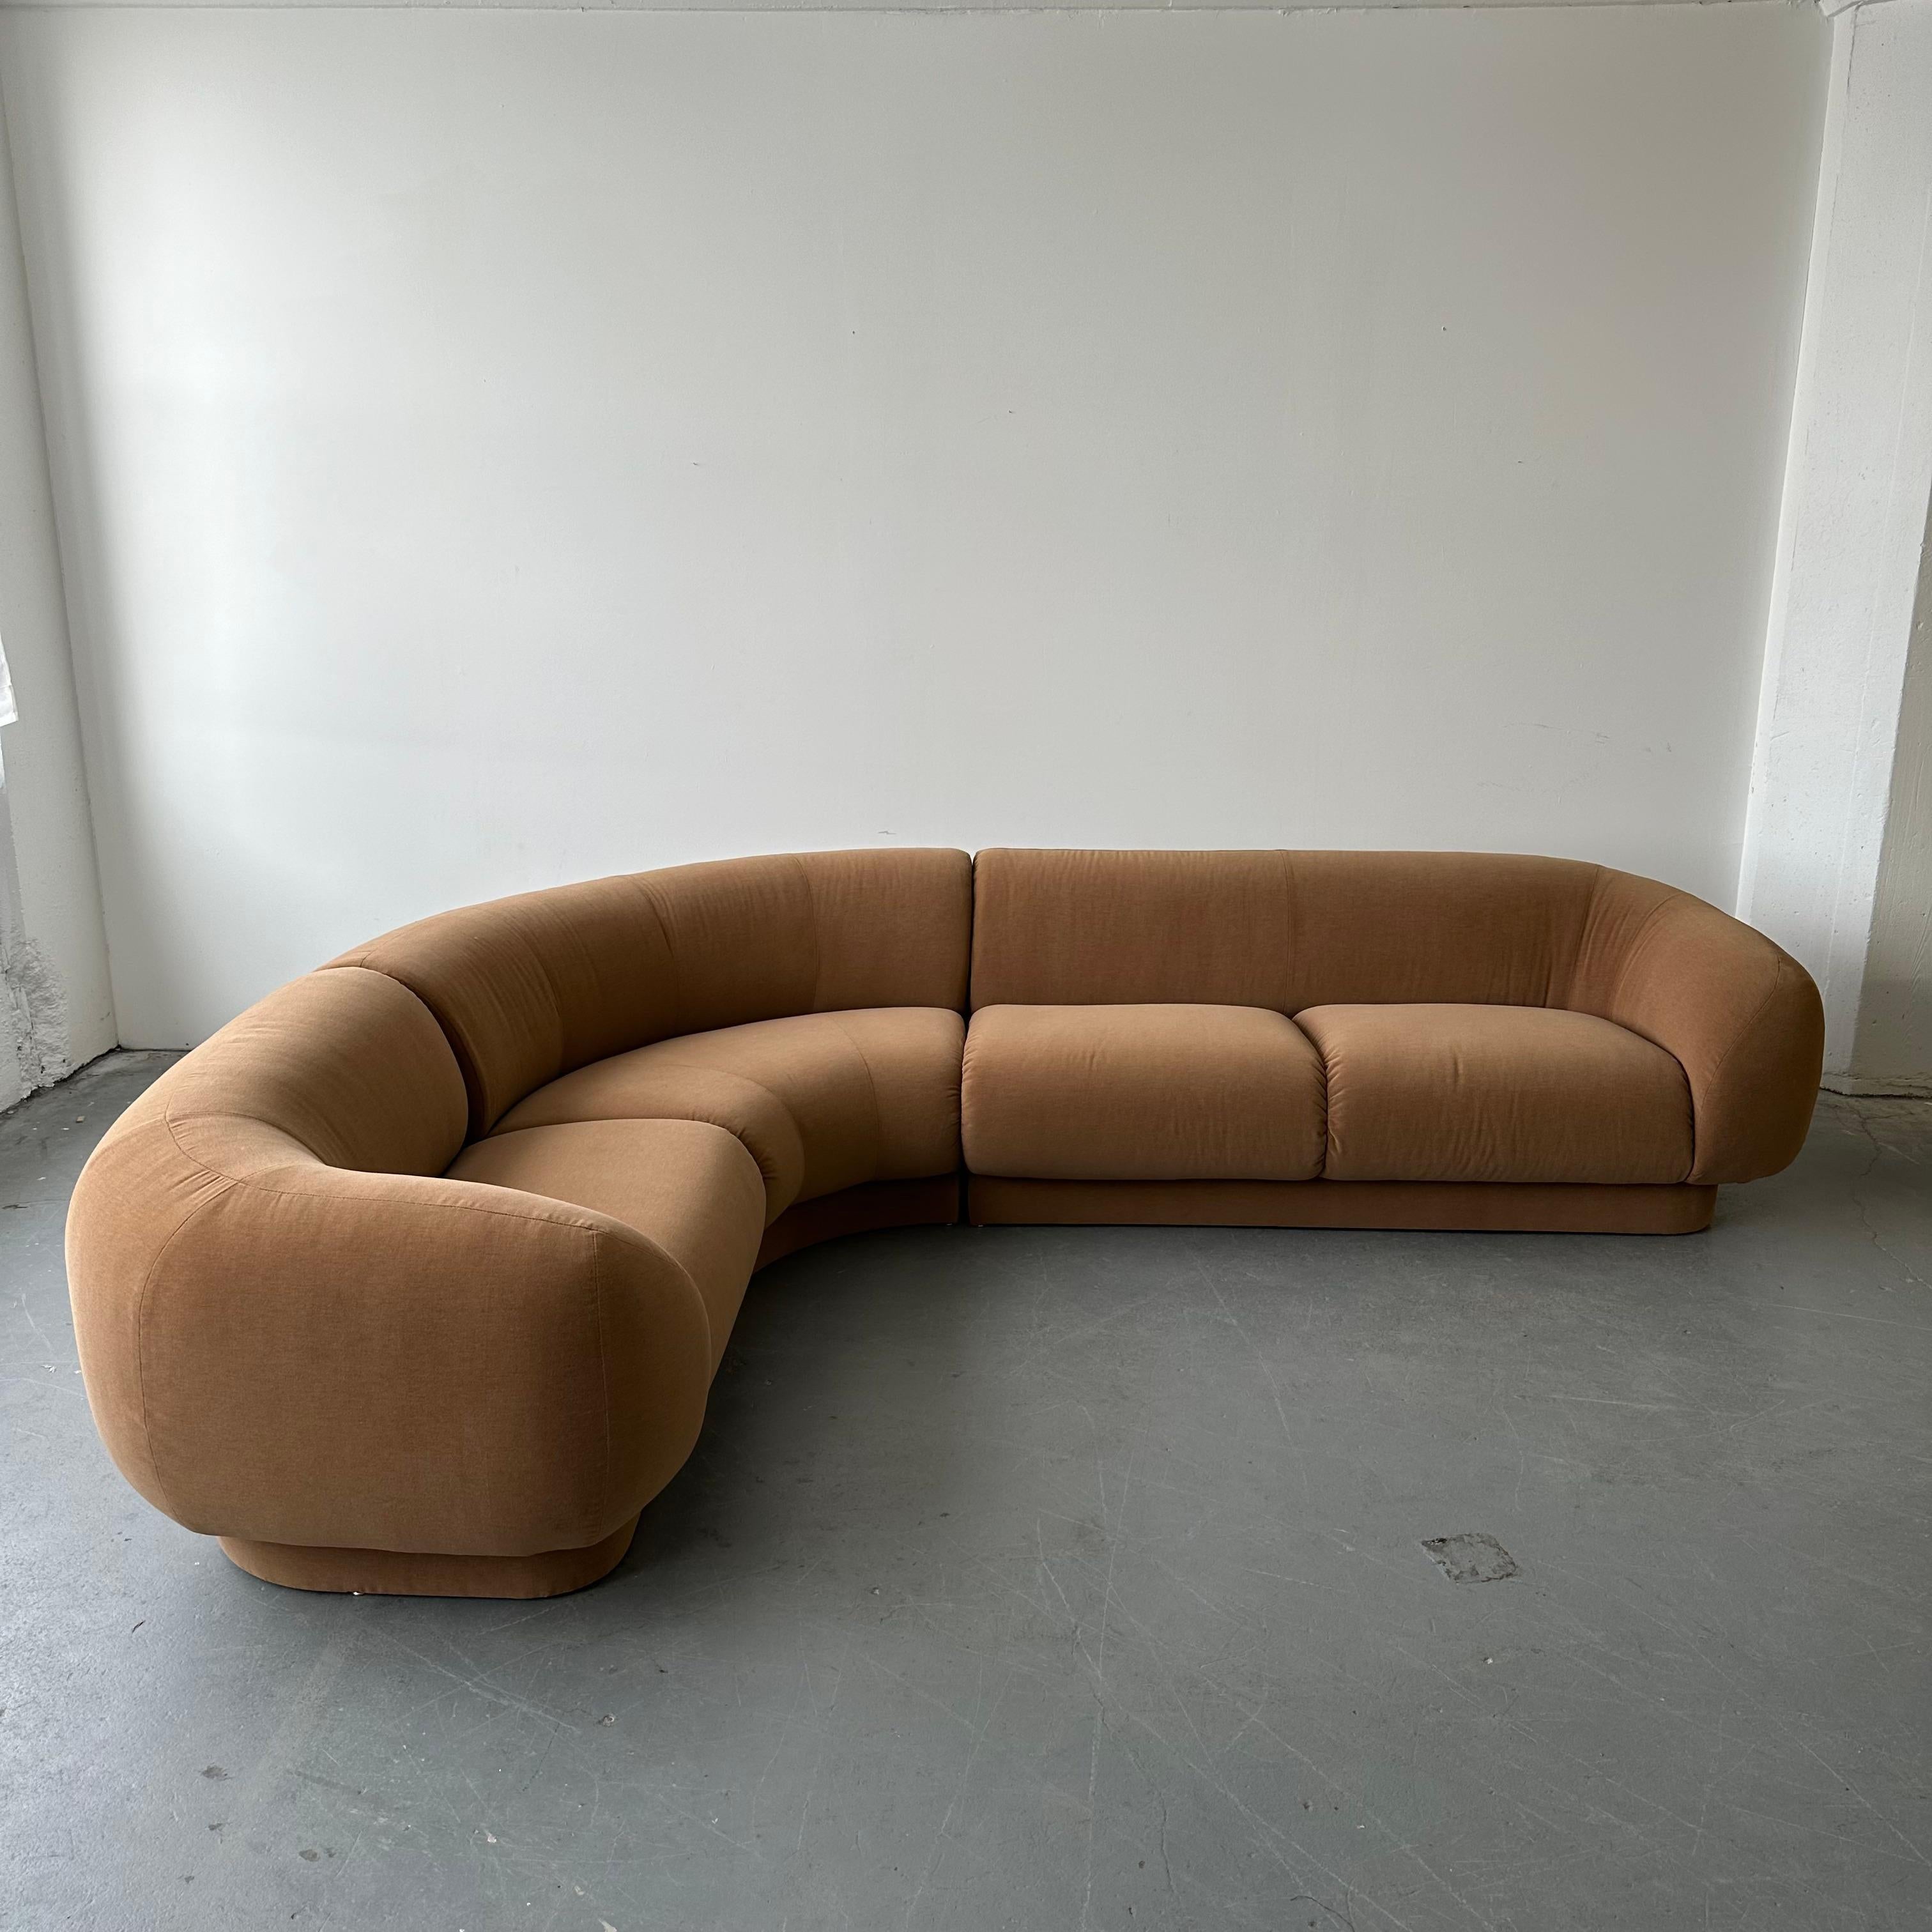 by Preview c. 1980s, freshly reupholstered in a Belgian alpaca velvet - excellent condition and incredibly comfortable. All three sections have latches that firmly hold the sectional in place

Individual Dimensions:
Small One Seater - 46